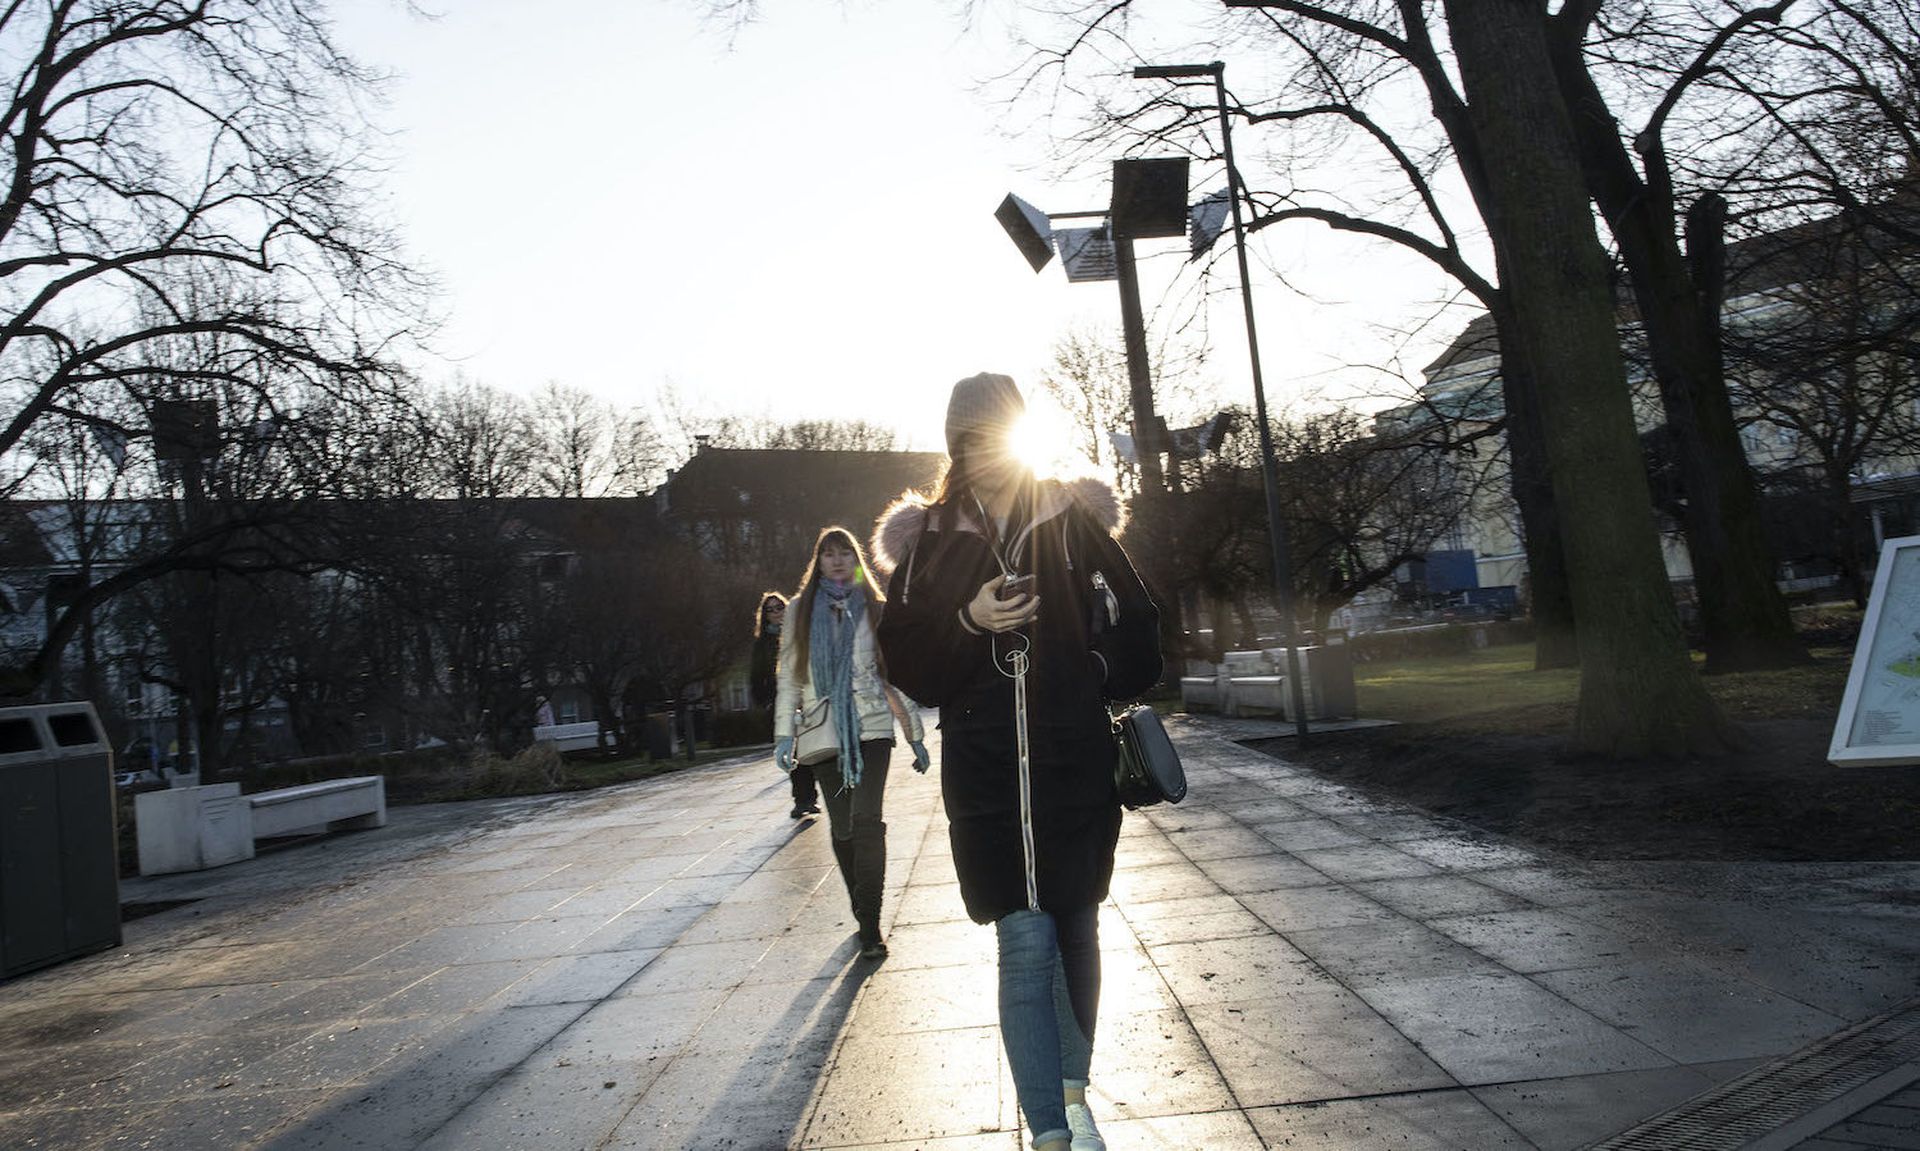 People walk on a late winter afternoon on January 9, 2020 in Tallinn, Estonia.  The country is on the leading edge of combating Russian cyber and misinformation attacks. (Alfredo Sosa/The Christian Science Monitor via Getty Images)